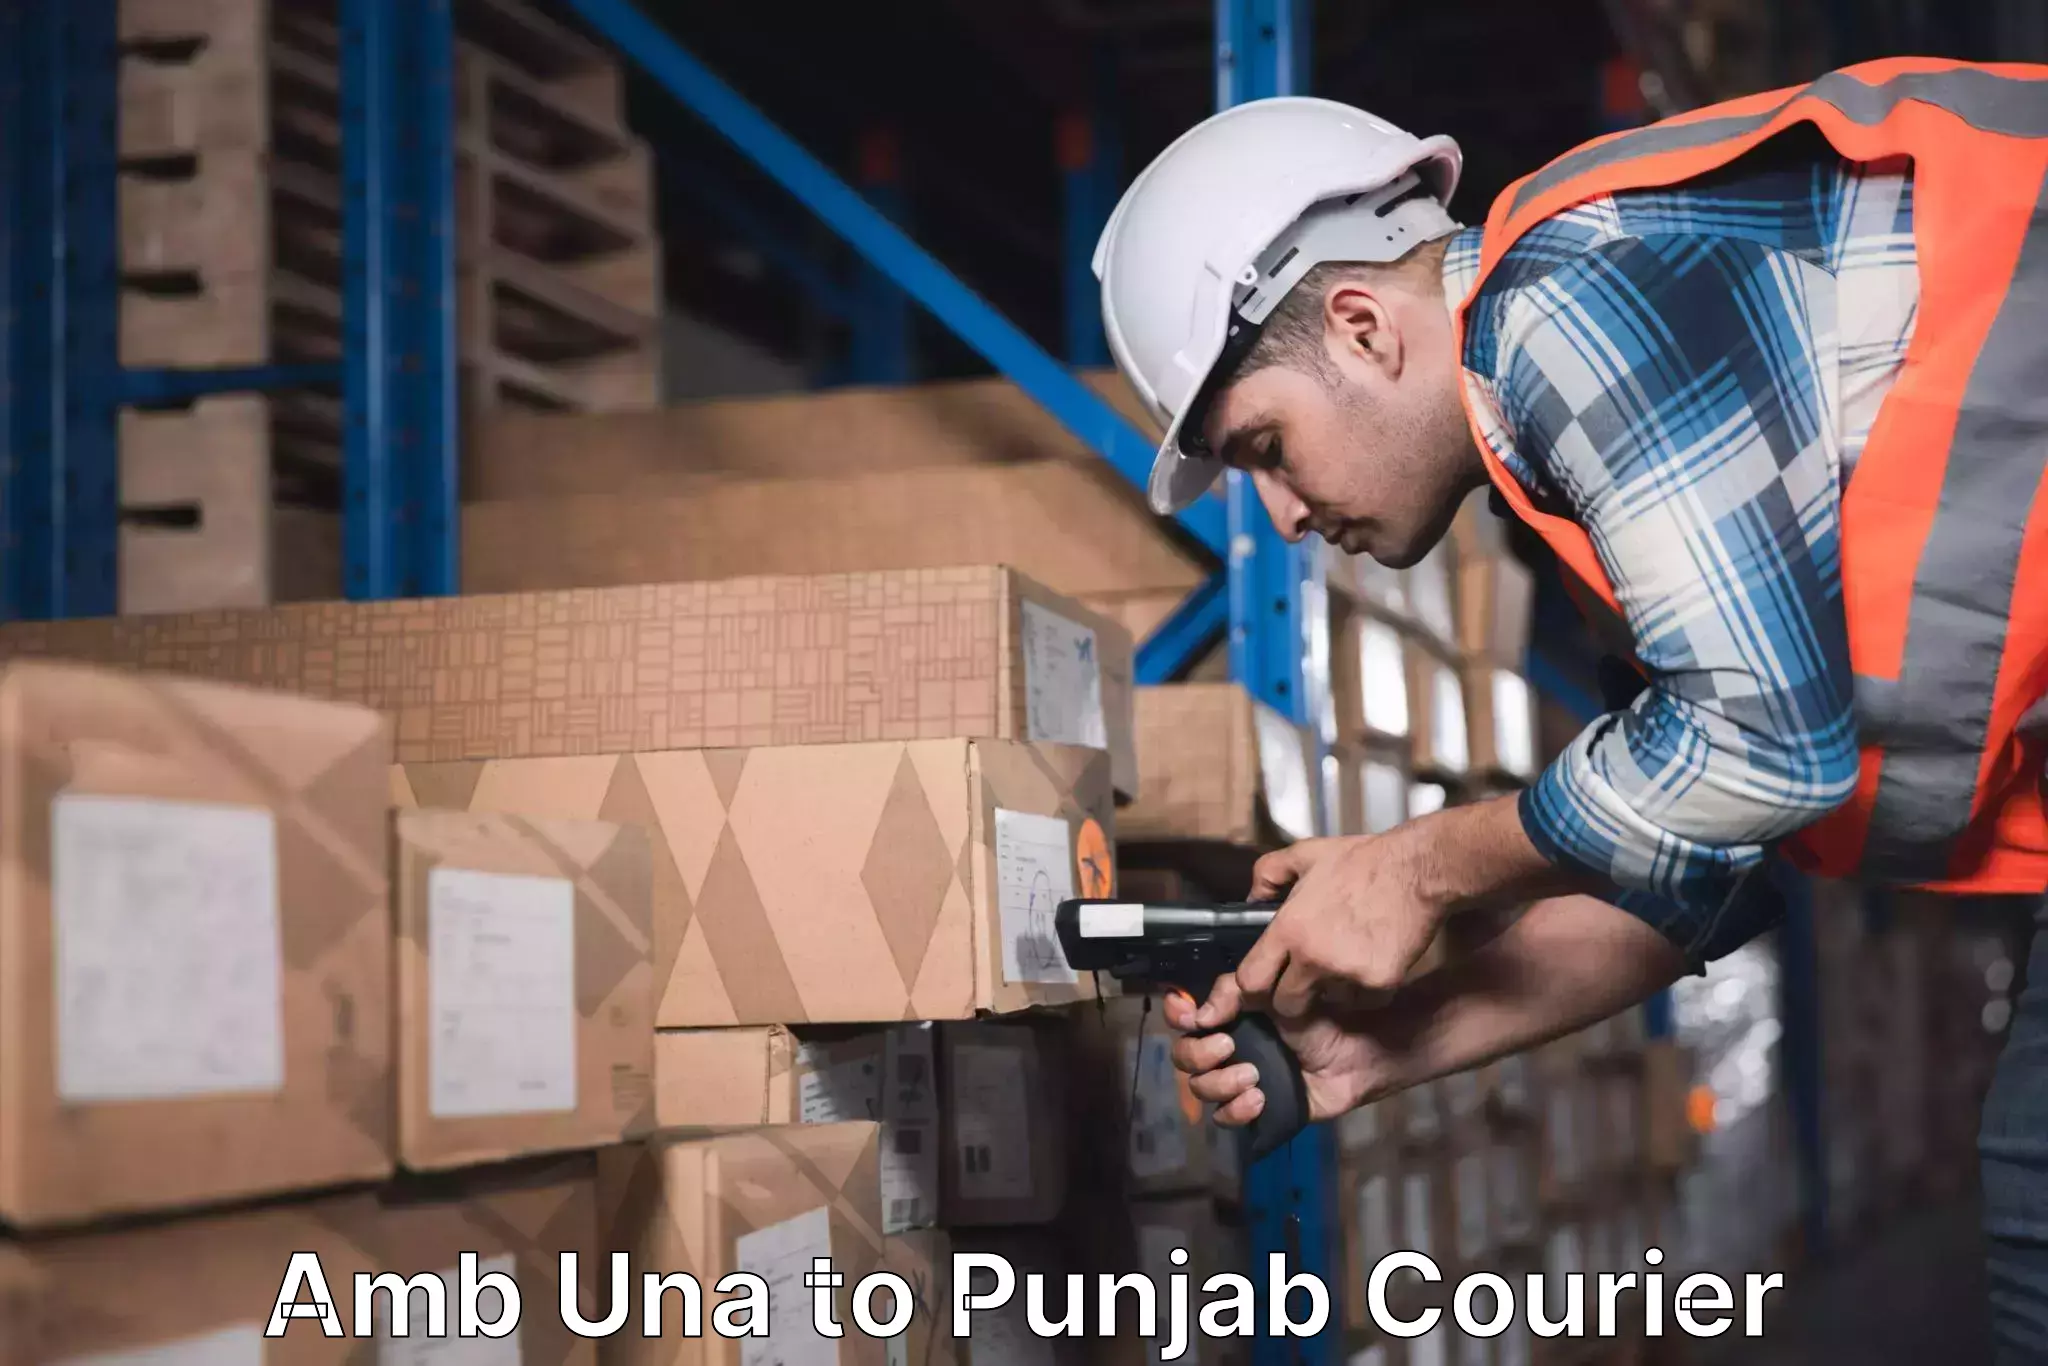 Residential courier service Amb Una to Punjab